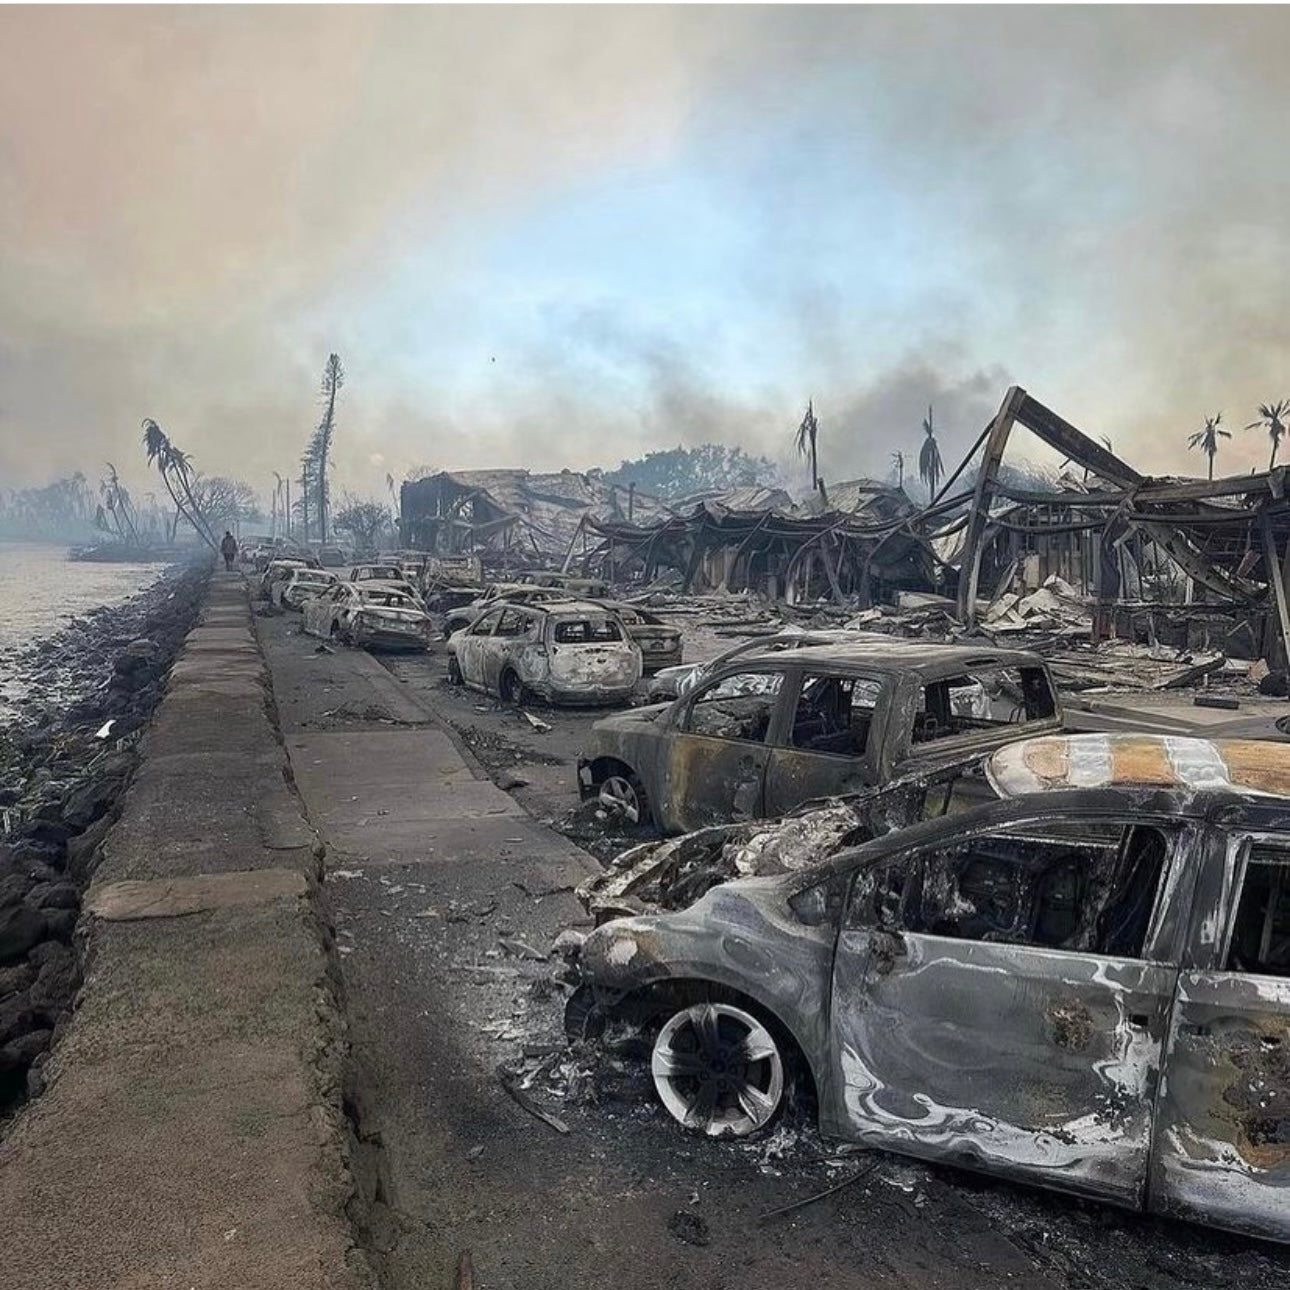 Image of burnt cars and buildings